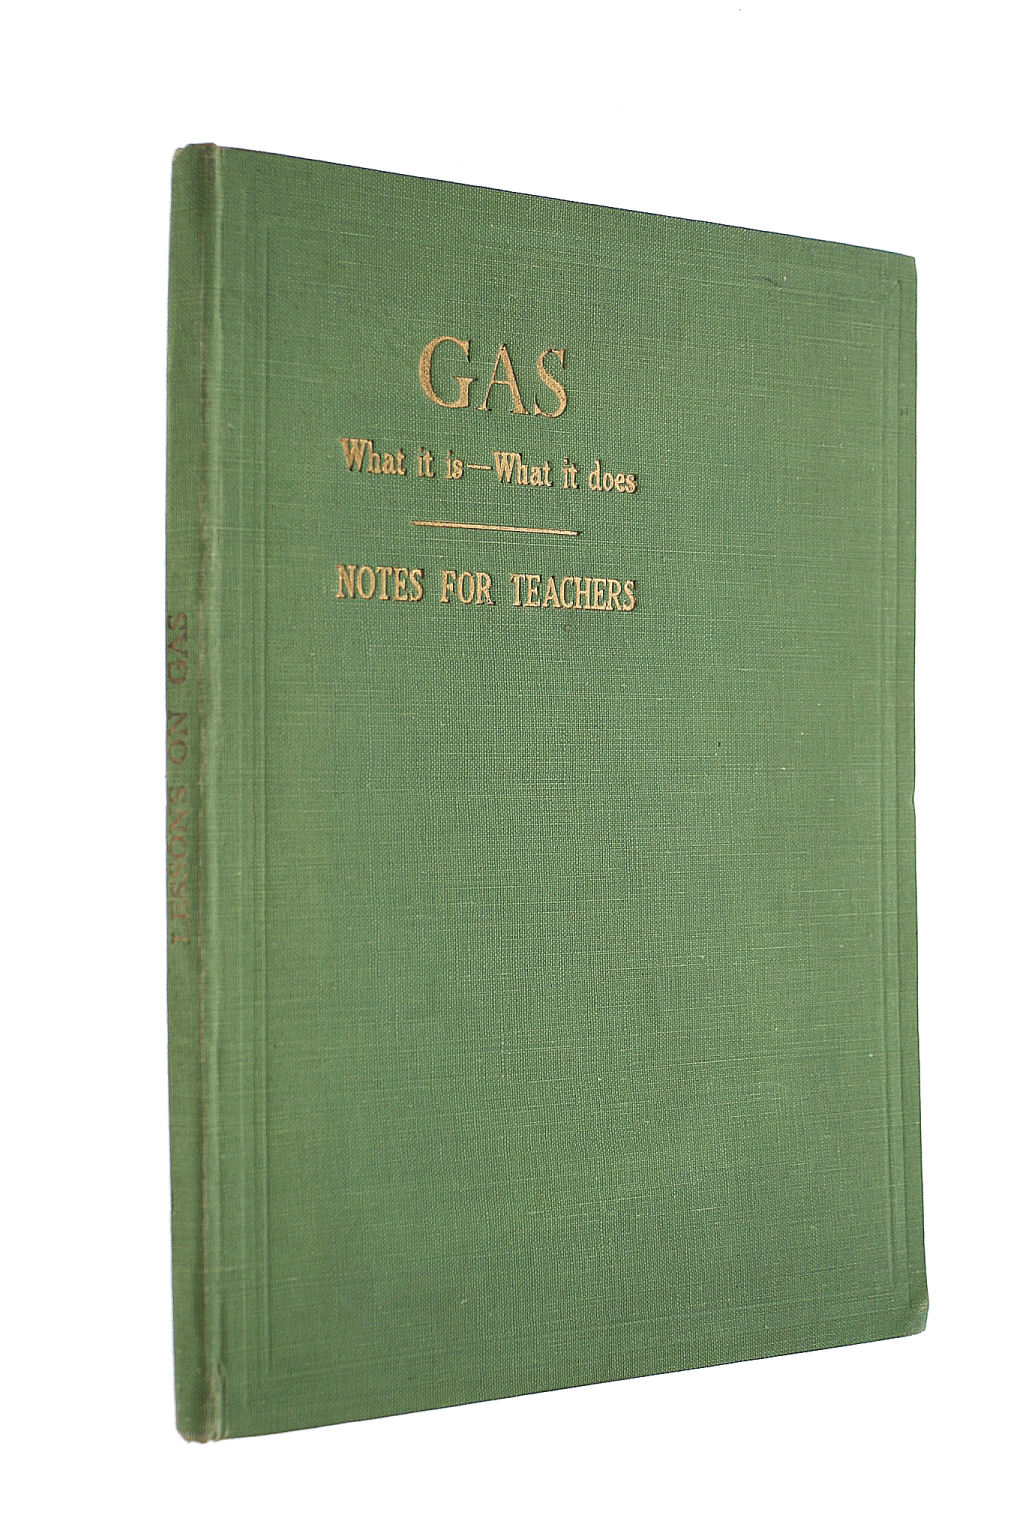 ANON - Gas, What it is -- What it does, Notes for Teachers